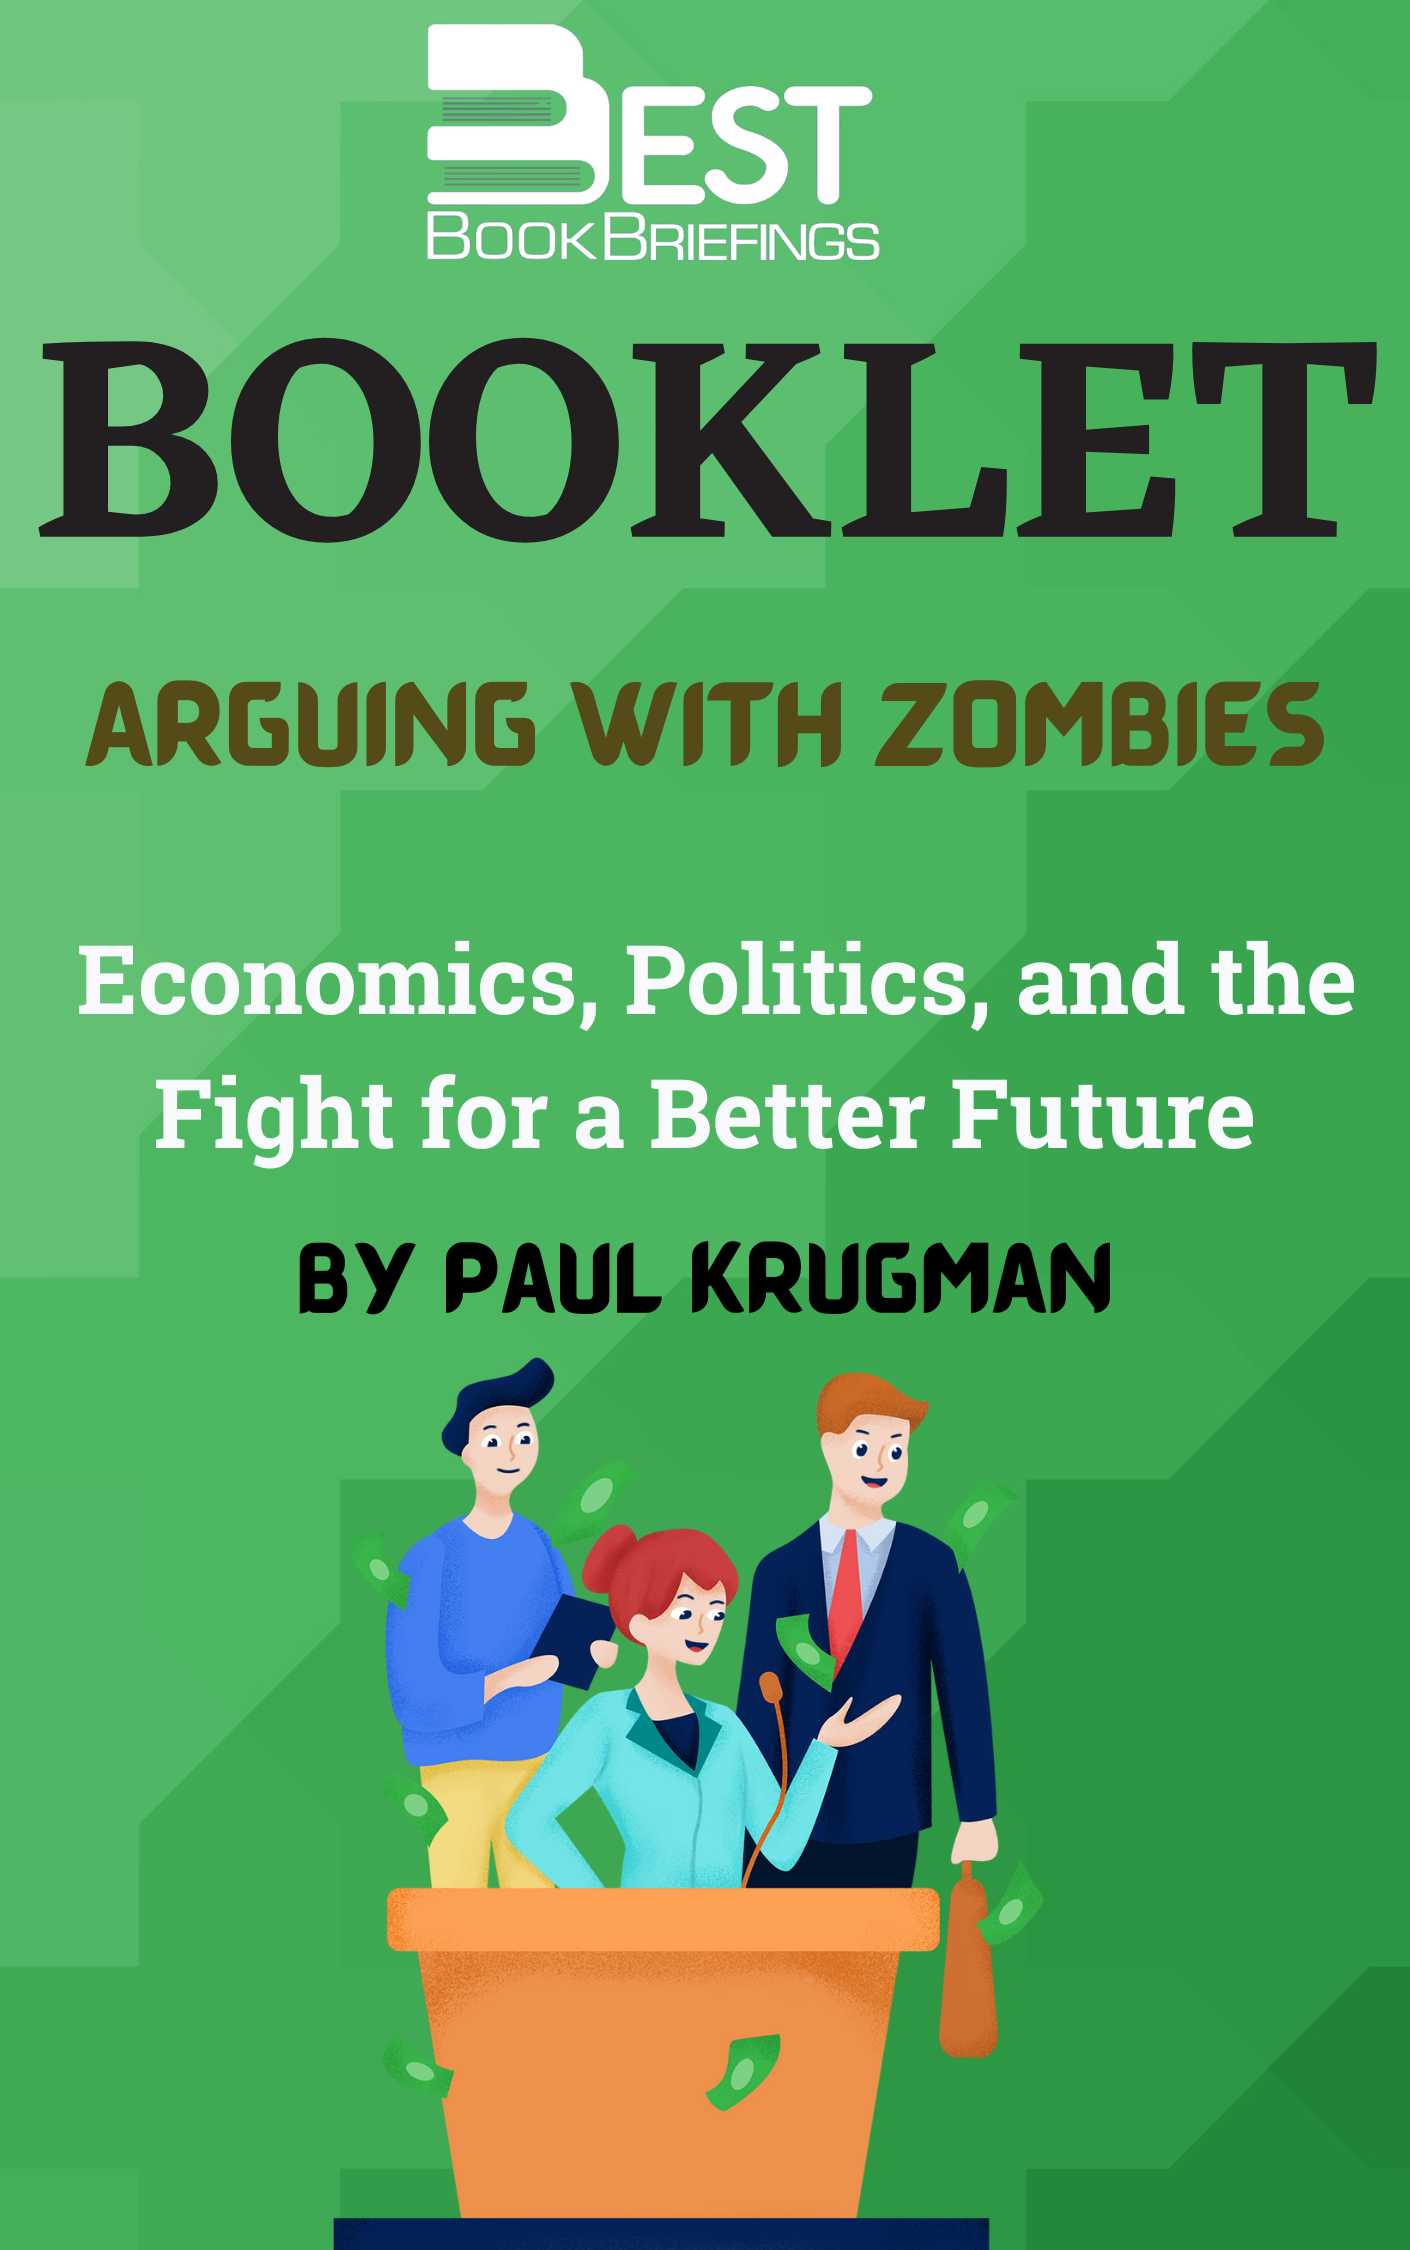   There is no better guide than Paul Krugman to basic economics, the ideas that animate much of our public policy. Likewise, there is no stronger foe of zombie economics, the misunderstandings that just won’t die. In Arguing with Zombies, Krugman tackles many of these misunderstandings, taking stock of where the United States has 